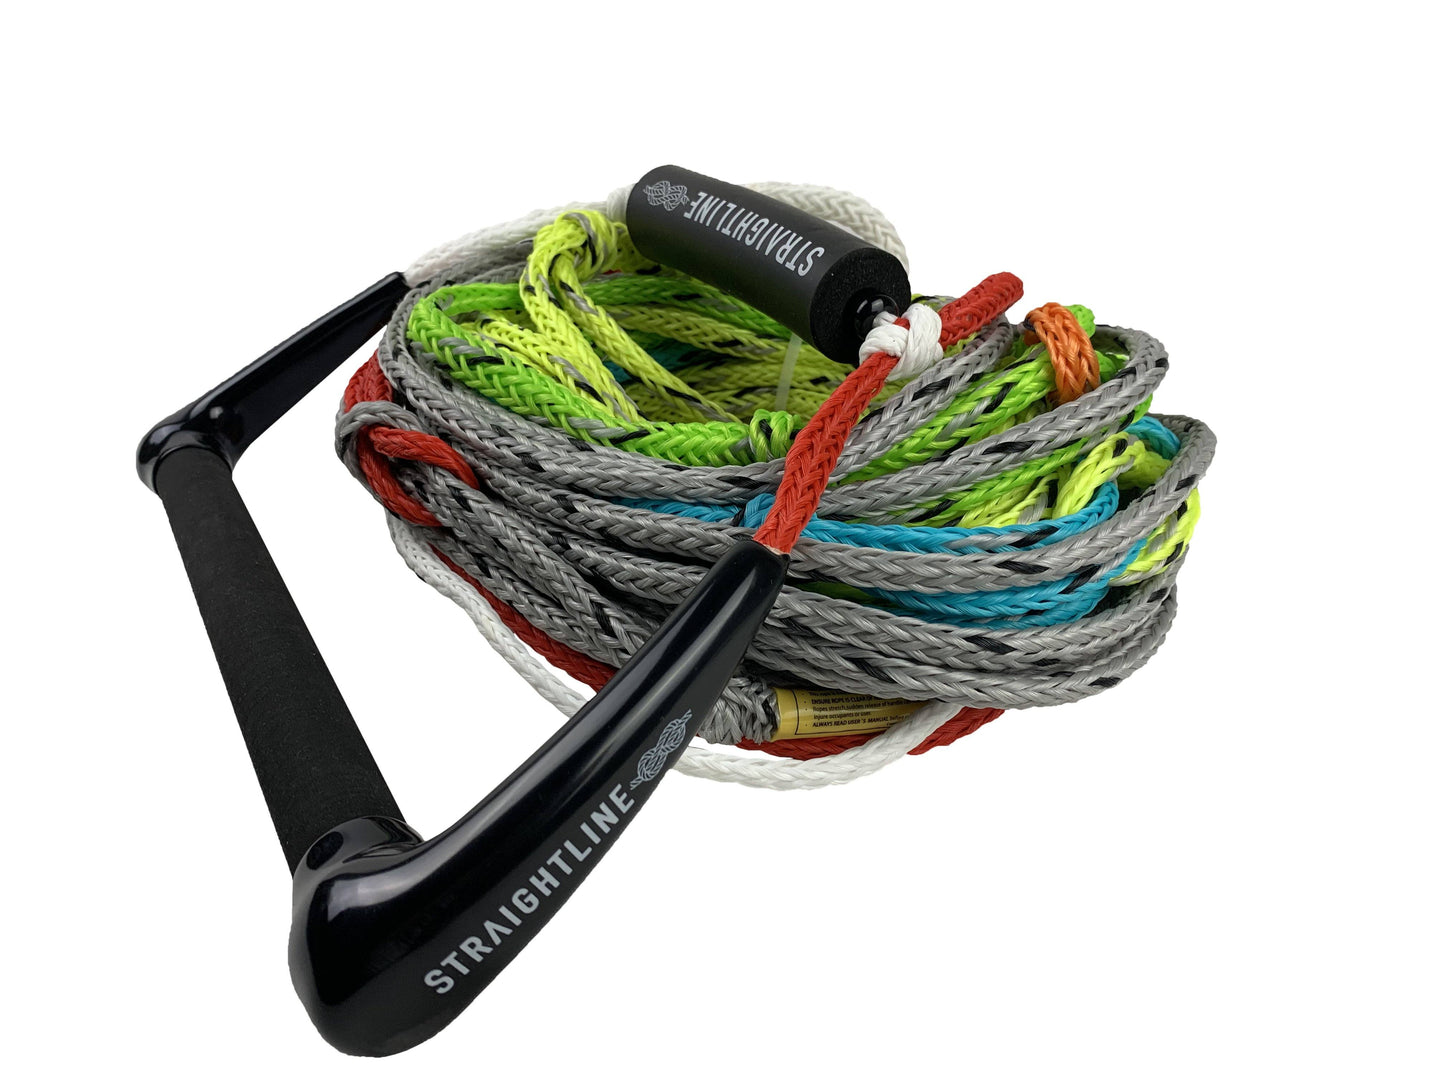 Team Lv Handle W/ 5 Section Watersports - Ropes And Handles - Ski Ropes Straightline 